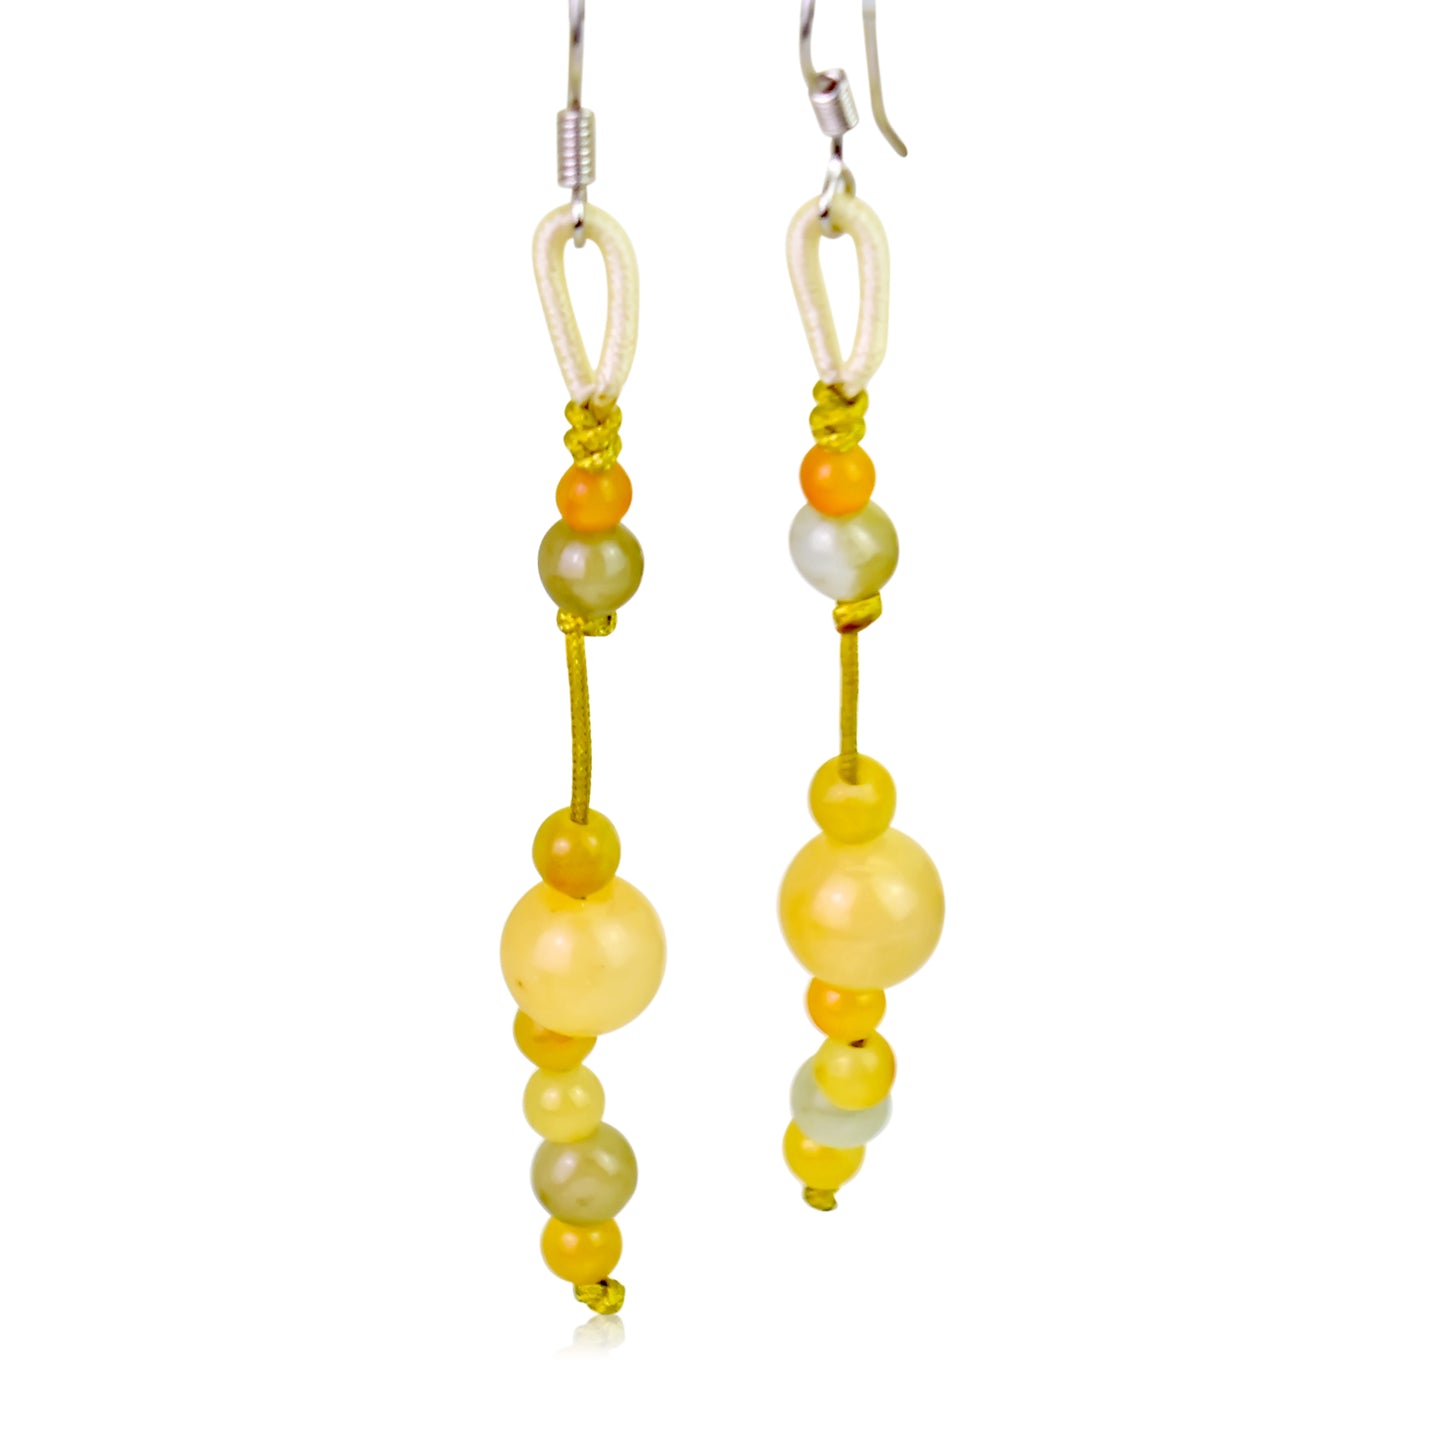 Make a Bold Statement with Honey Jade Beads Thread Earrings made with Yellow Cord